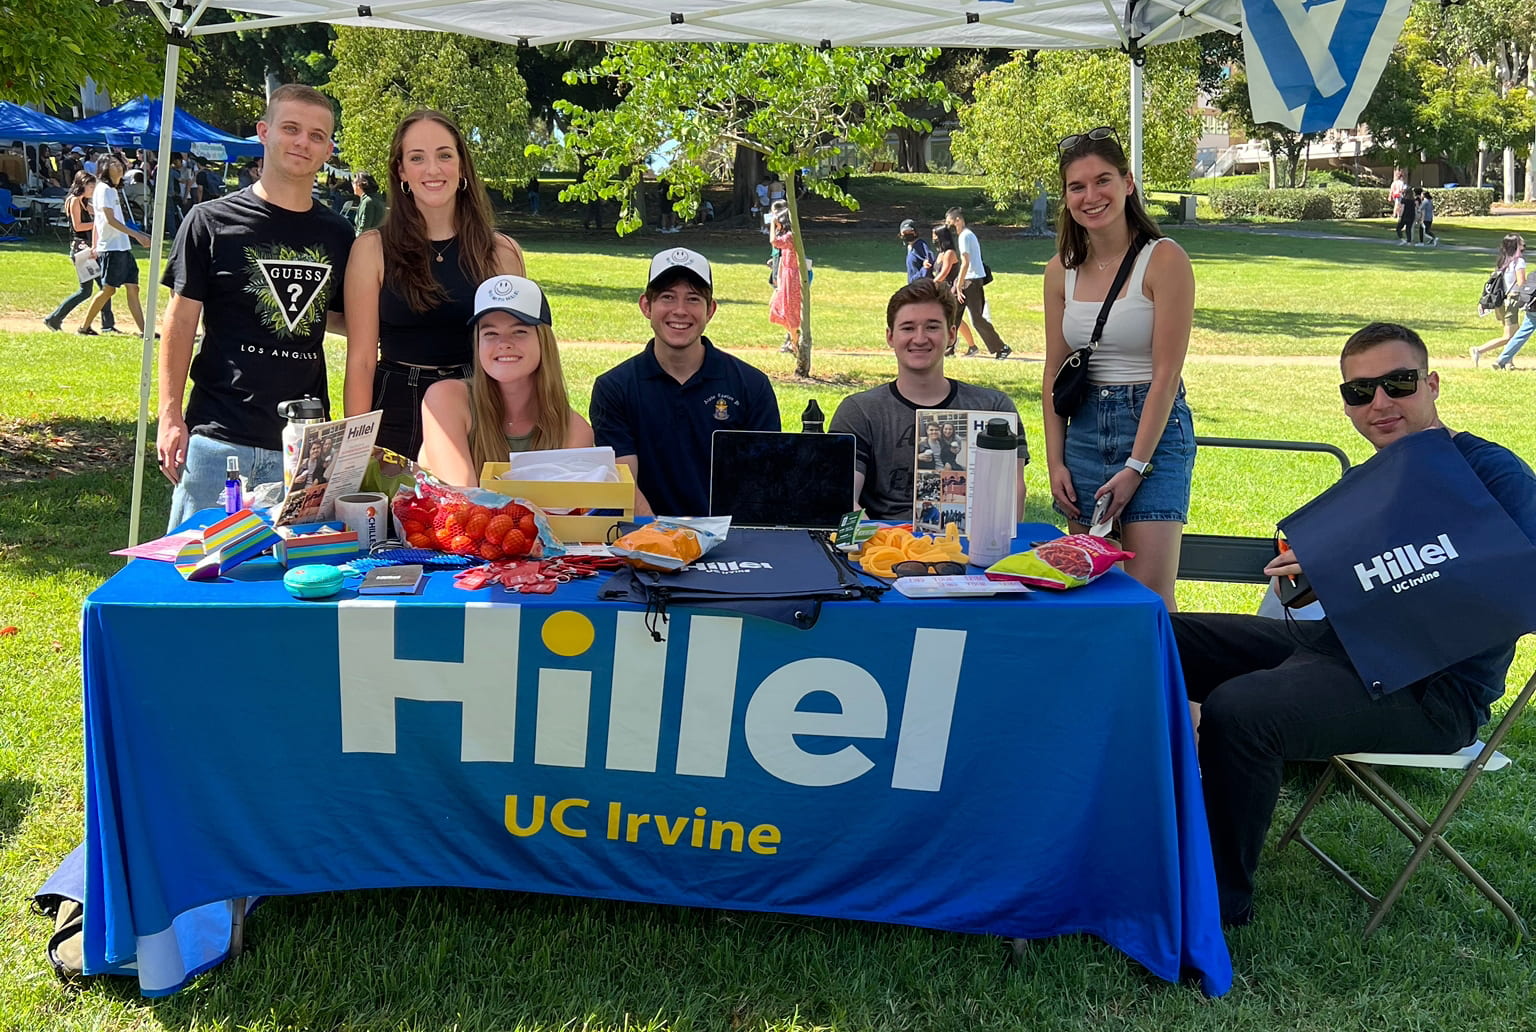 Students staffing the Hillel at UCI table at the fall 2022 Anteater Involvement Fair are (from left) Shahar Broner, Shani Kirson, Isabella Fuiks, Daniel Stepanov, Jacob Schreiber, Sandra Ossman and Yoav Weber.